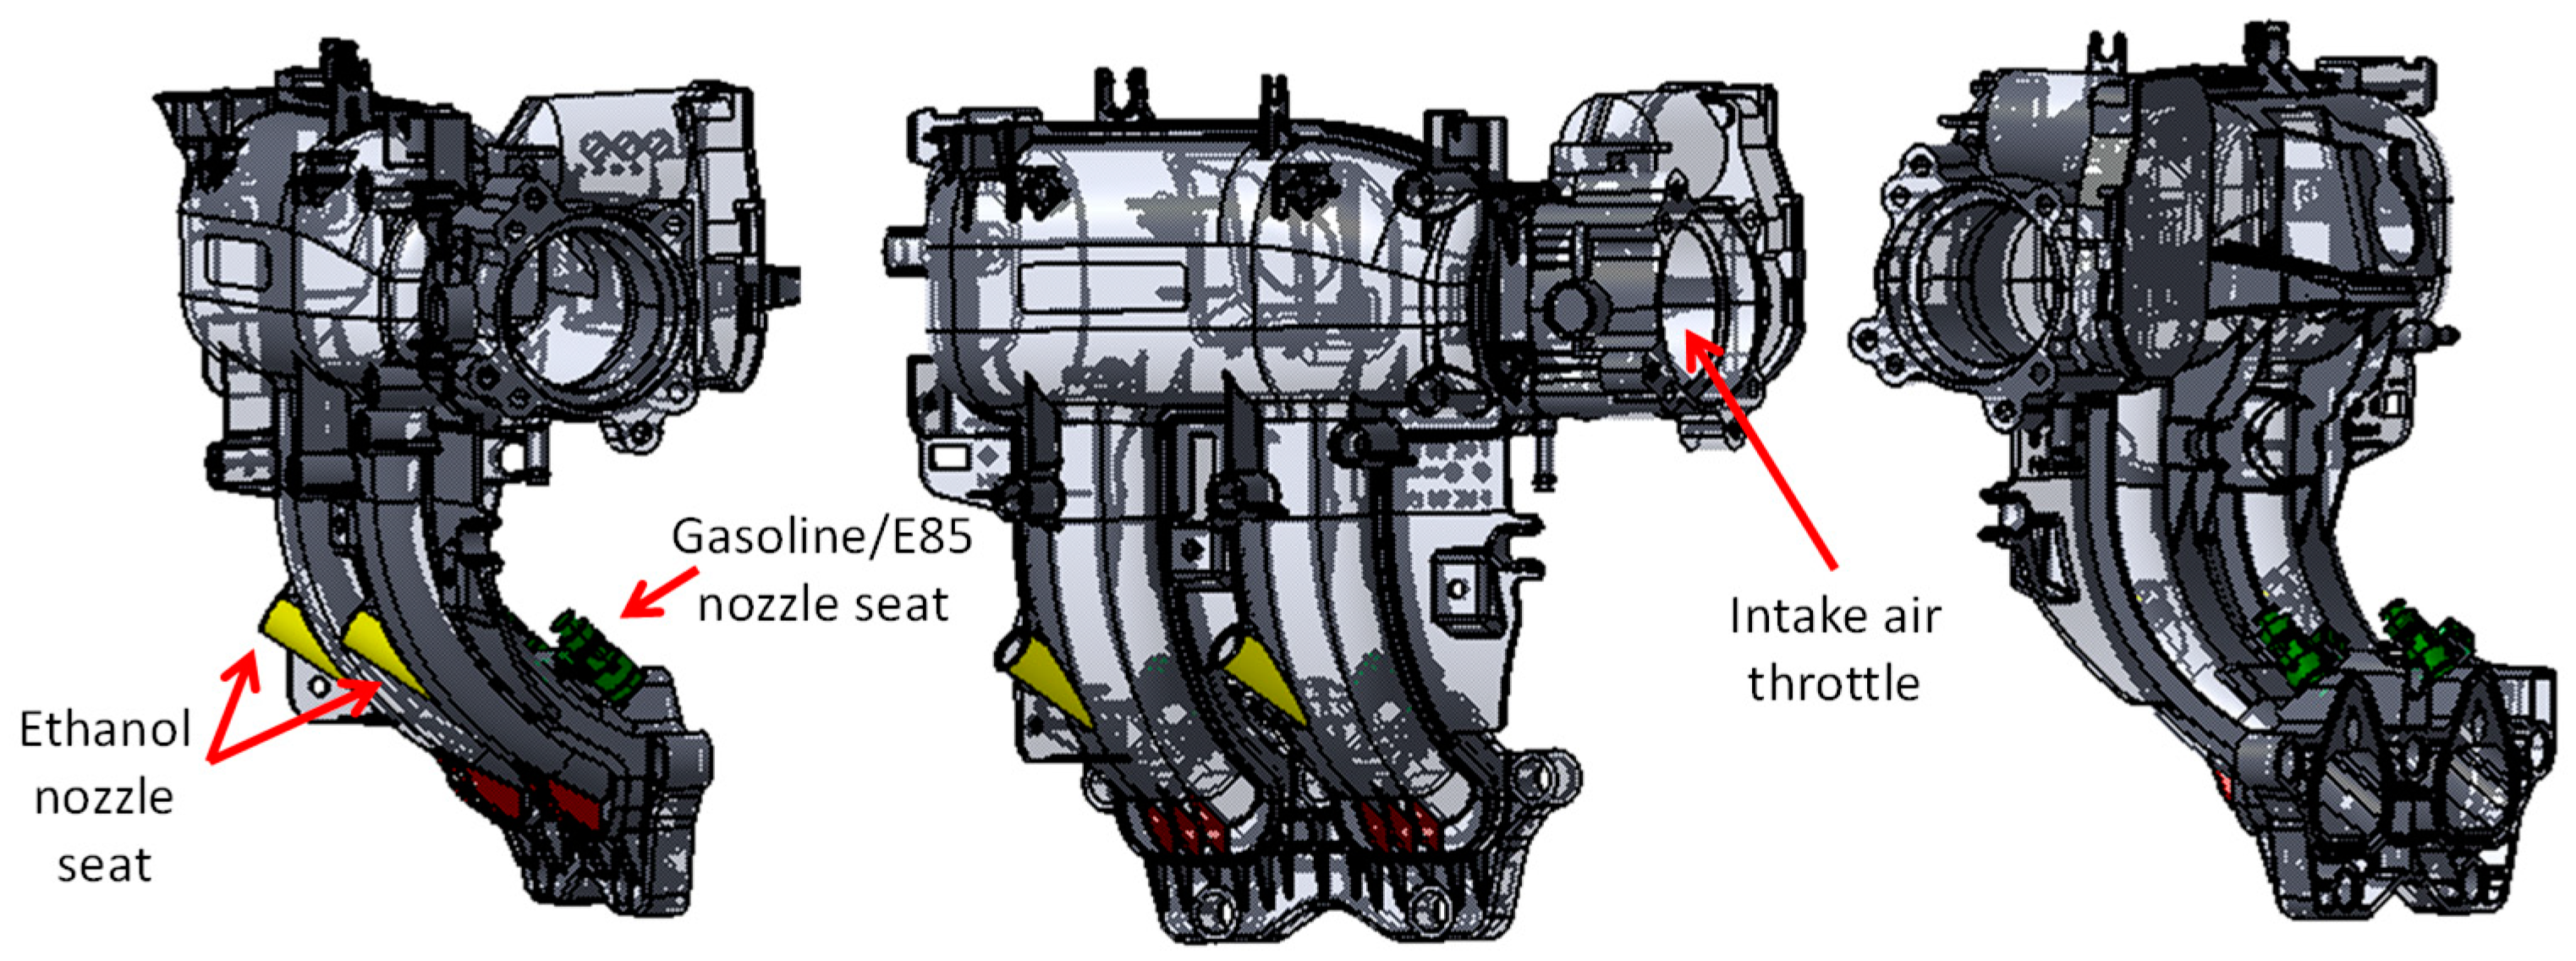 Energies | Free Full-Text | Experimental Comparative Study on Performance  and Emissions of E85 Adopting Different Injection Approaches in a  Turbocharged PFI SI Engine